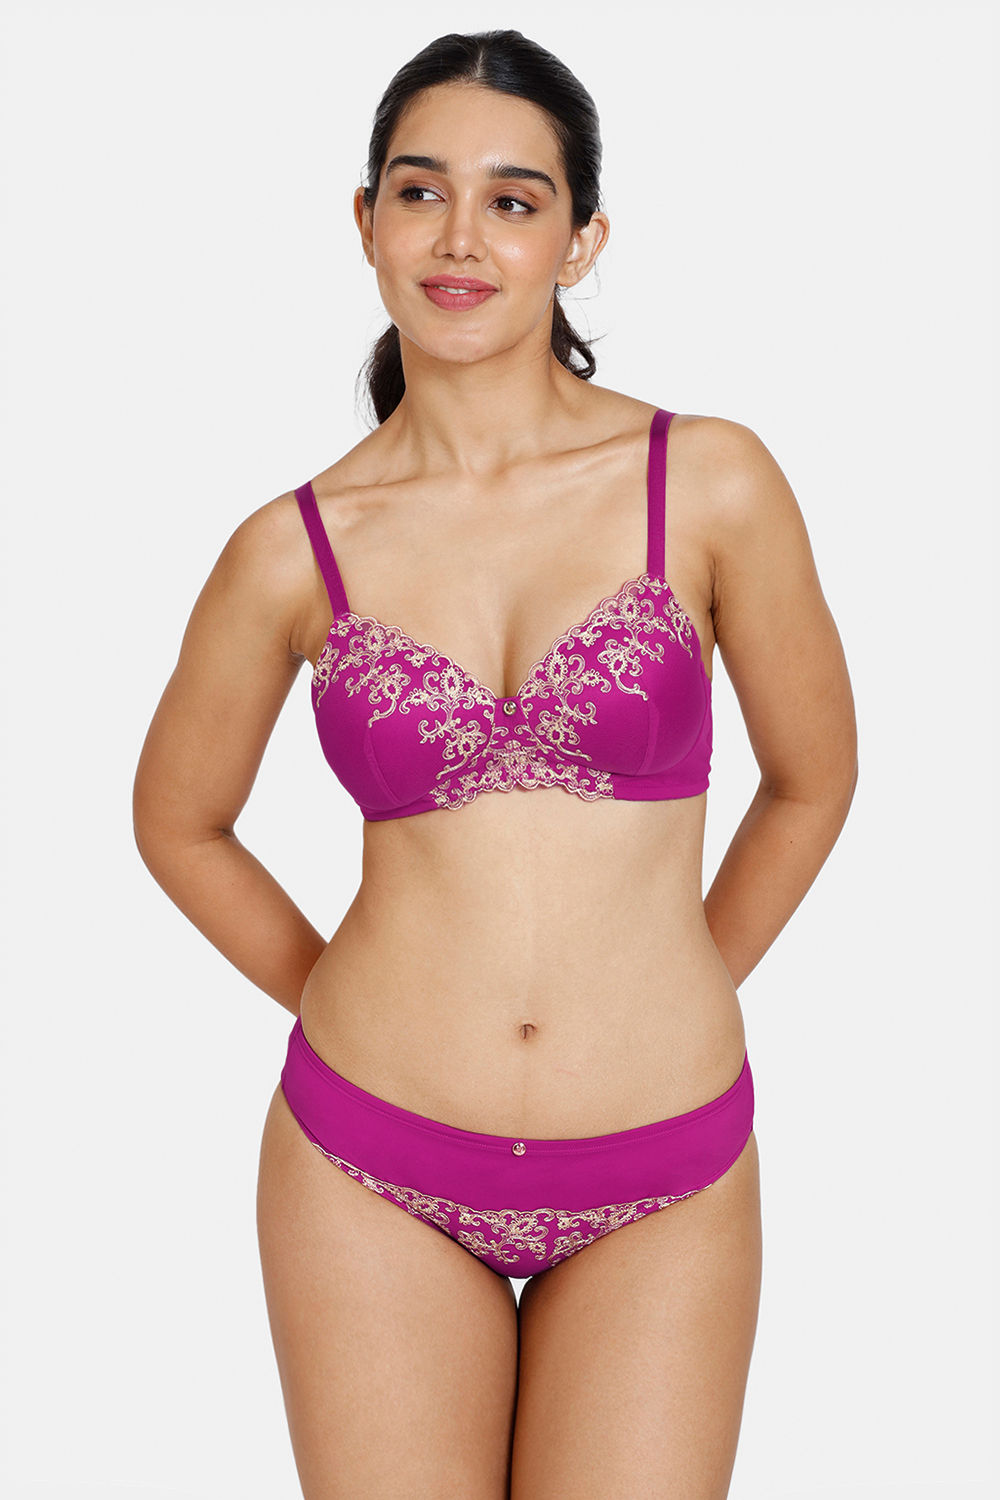 Buy Trendy Lacy Panty in Pink Color Online India, Best Prices, COD